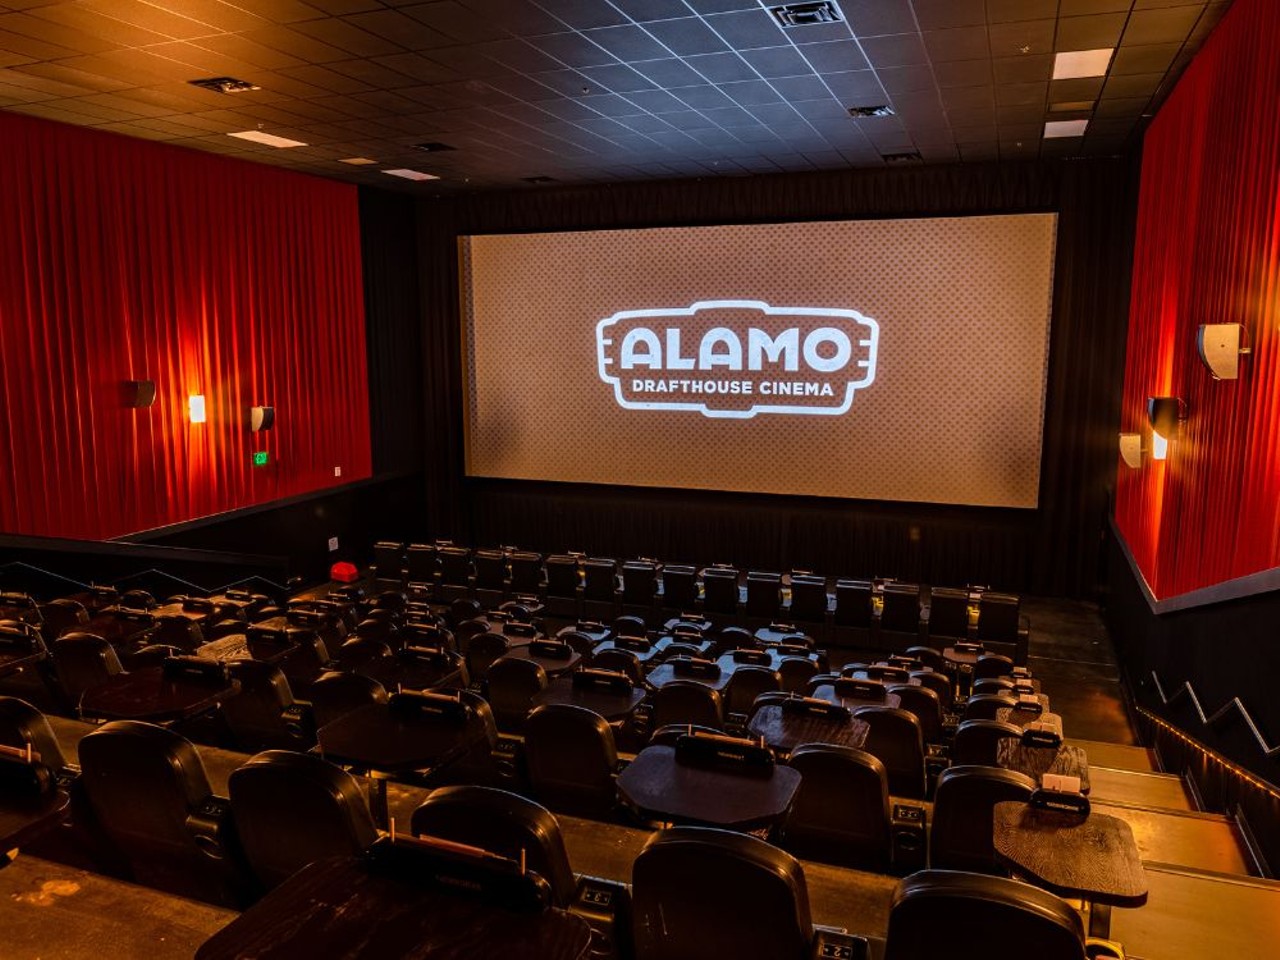 Catch a movie
San Antonio theater chains including Alamo Drafthouse, Santikos Entertainment and Regal Cinemas regularly host screenings starting past 9 and 10 p.m., but committed late-night moviegoers should stay on the lookout for less frequent midnight premieres.